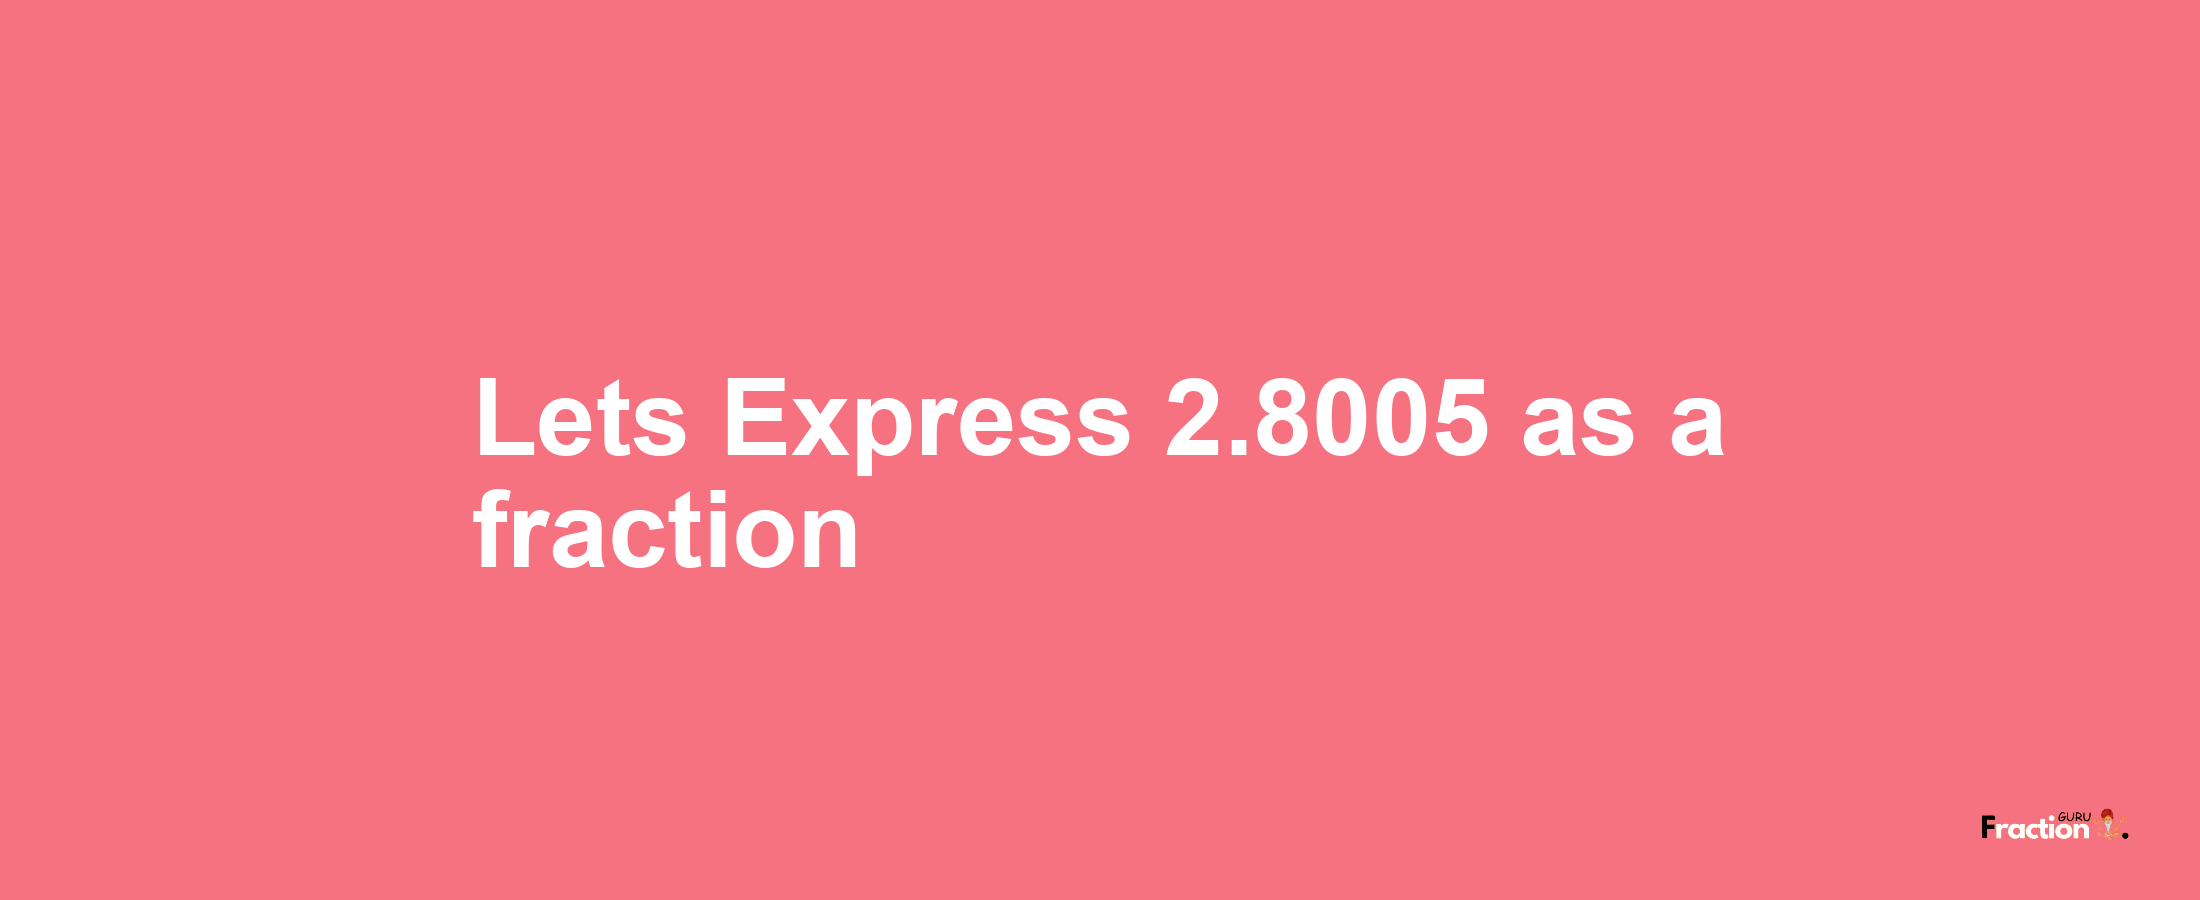 Lets Express 2.8005 as afraction